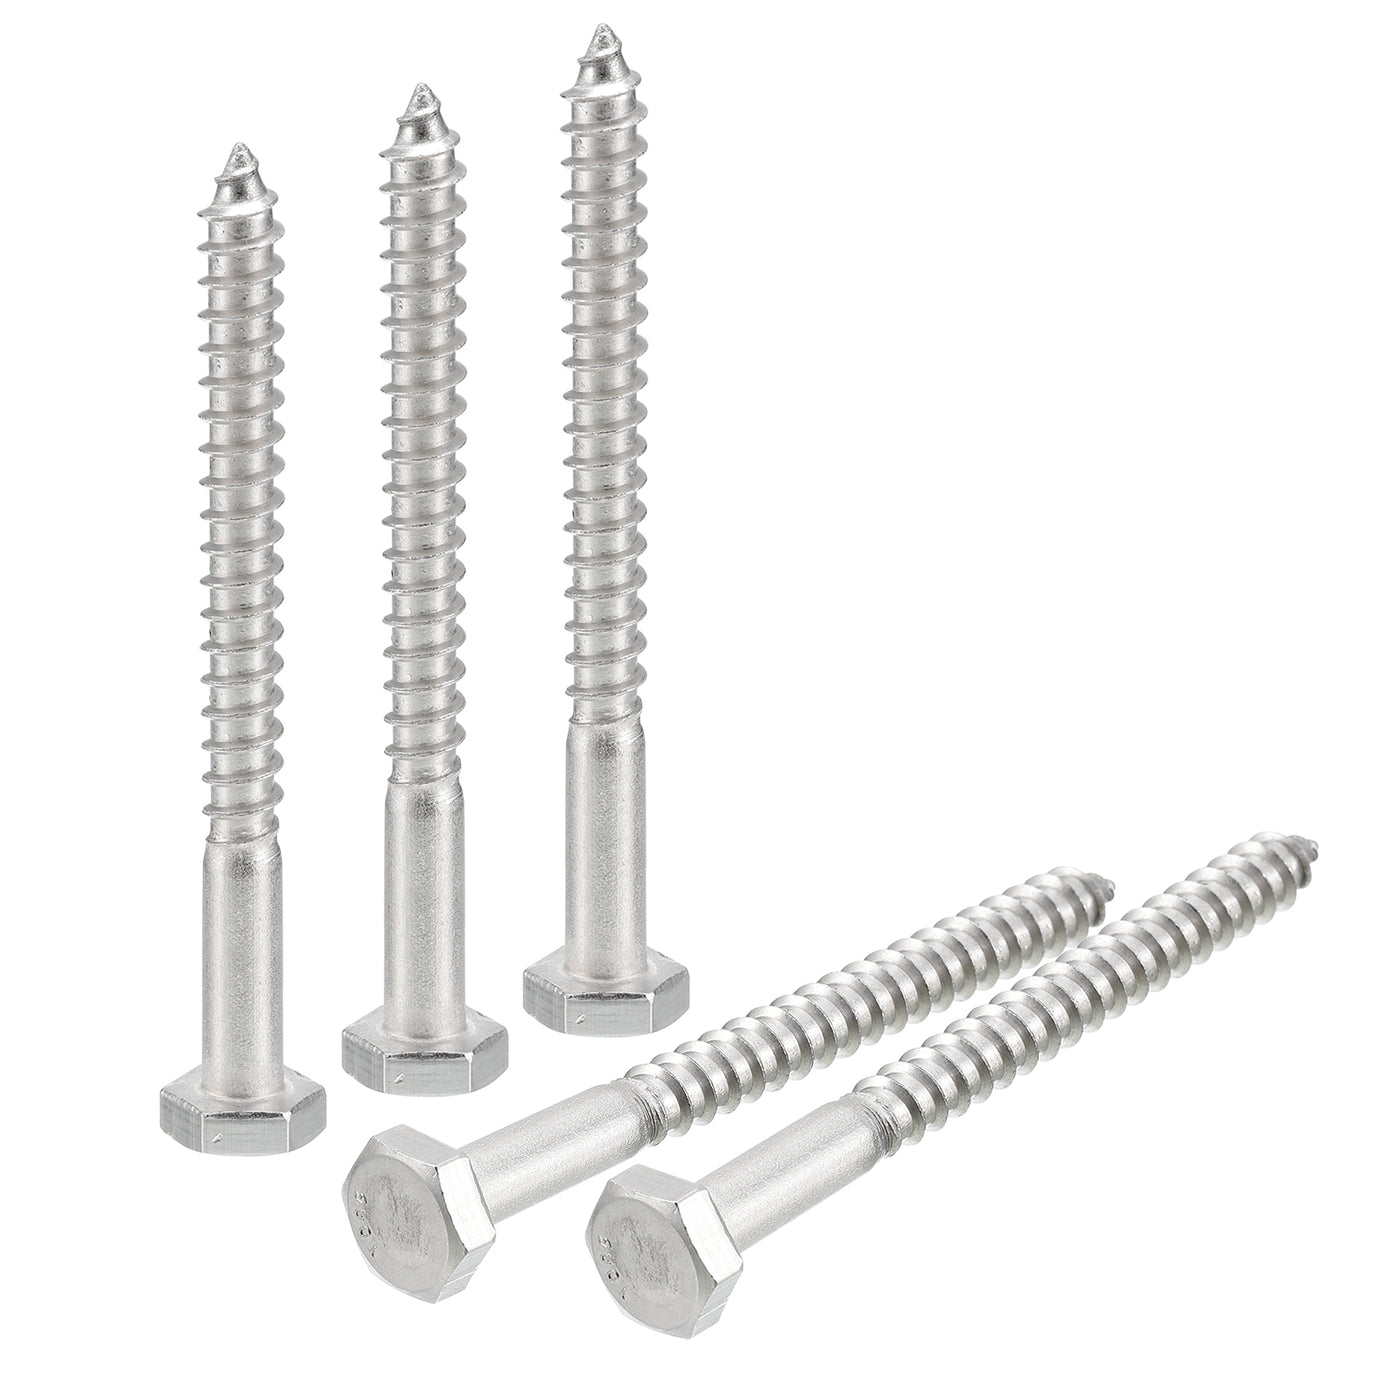 uxcell Uxcell Hex Head Lag Screws Bolts, 10pcs 1/4" x 3" 304 Stainless Steel Wood Screws